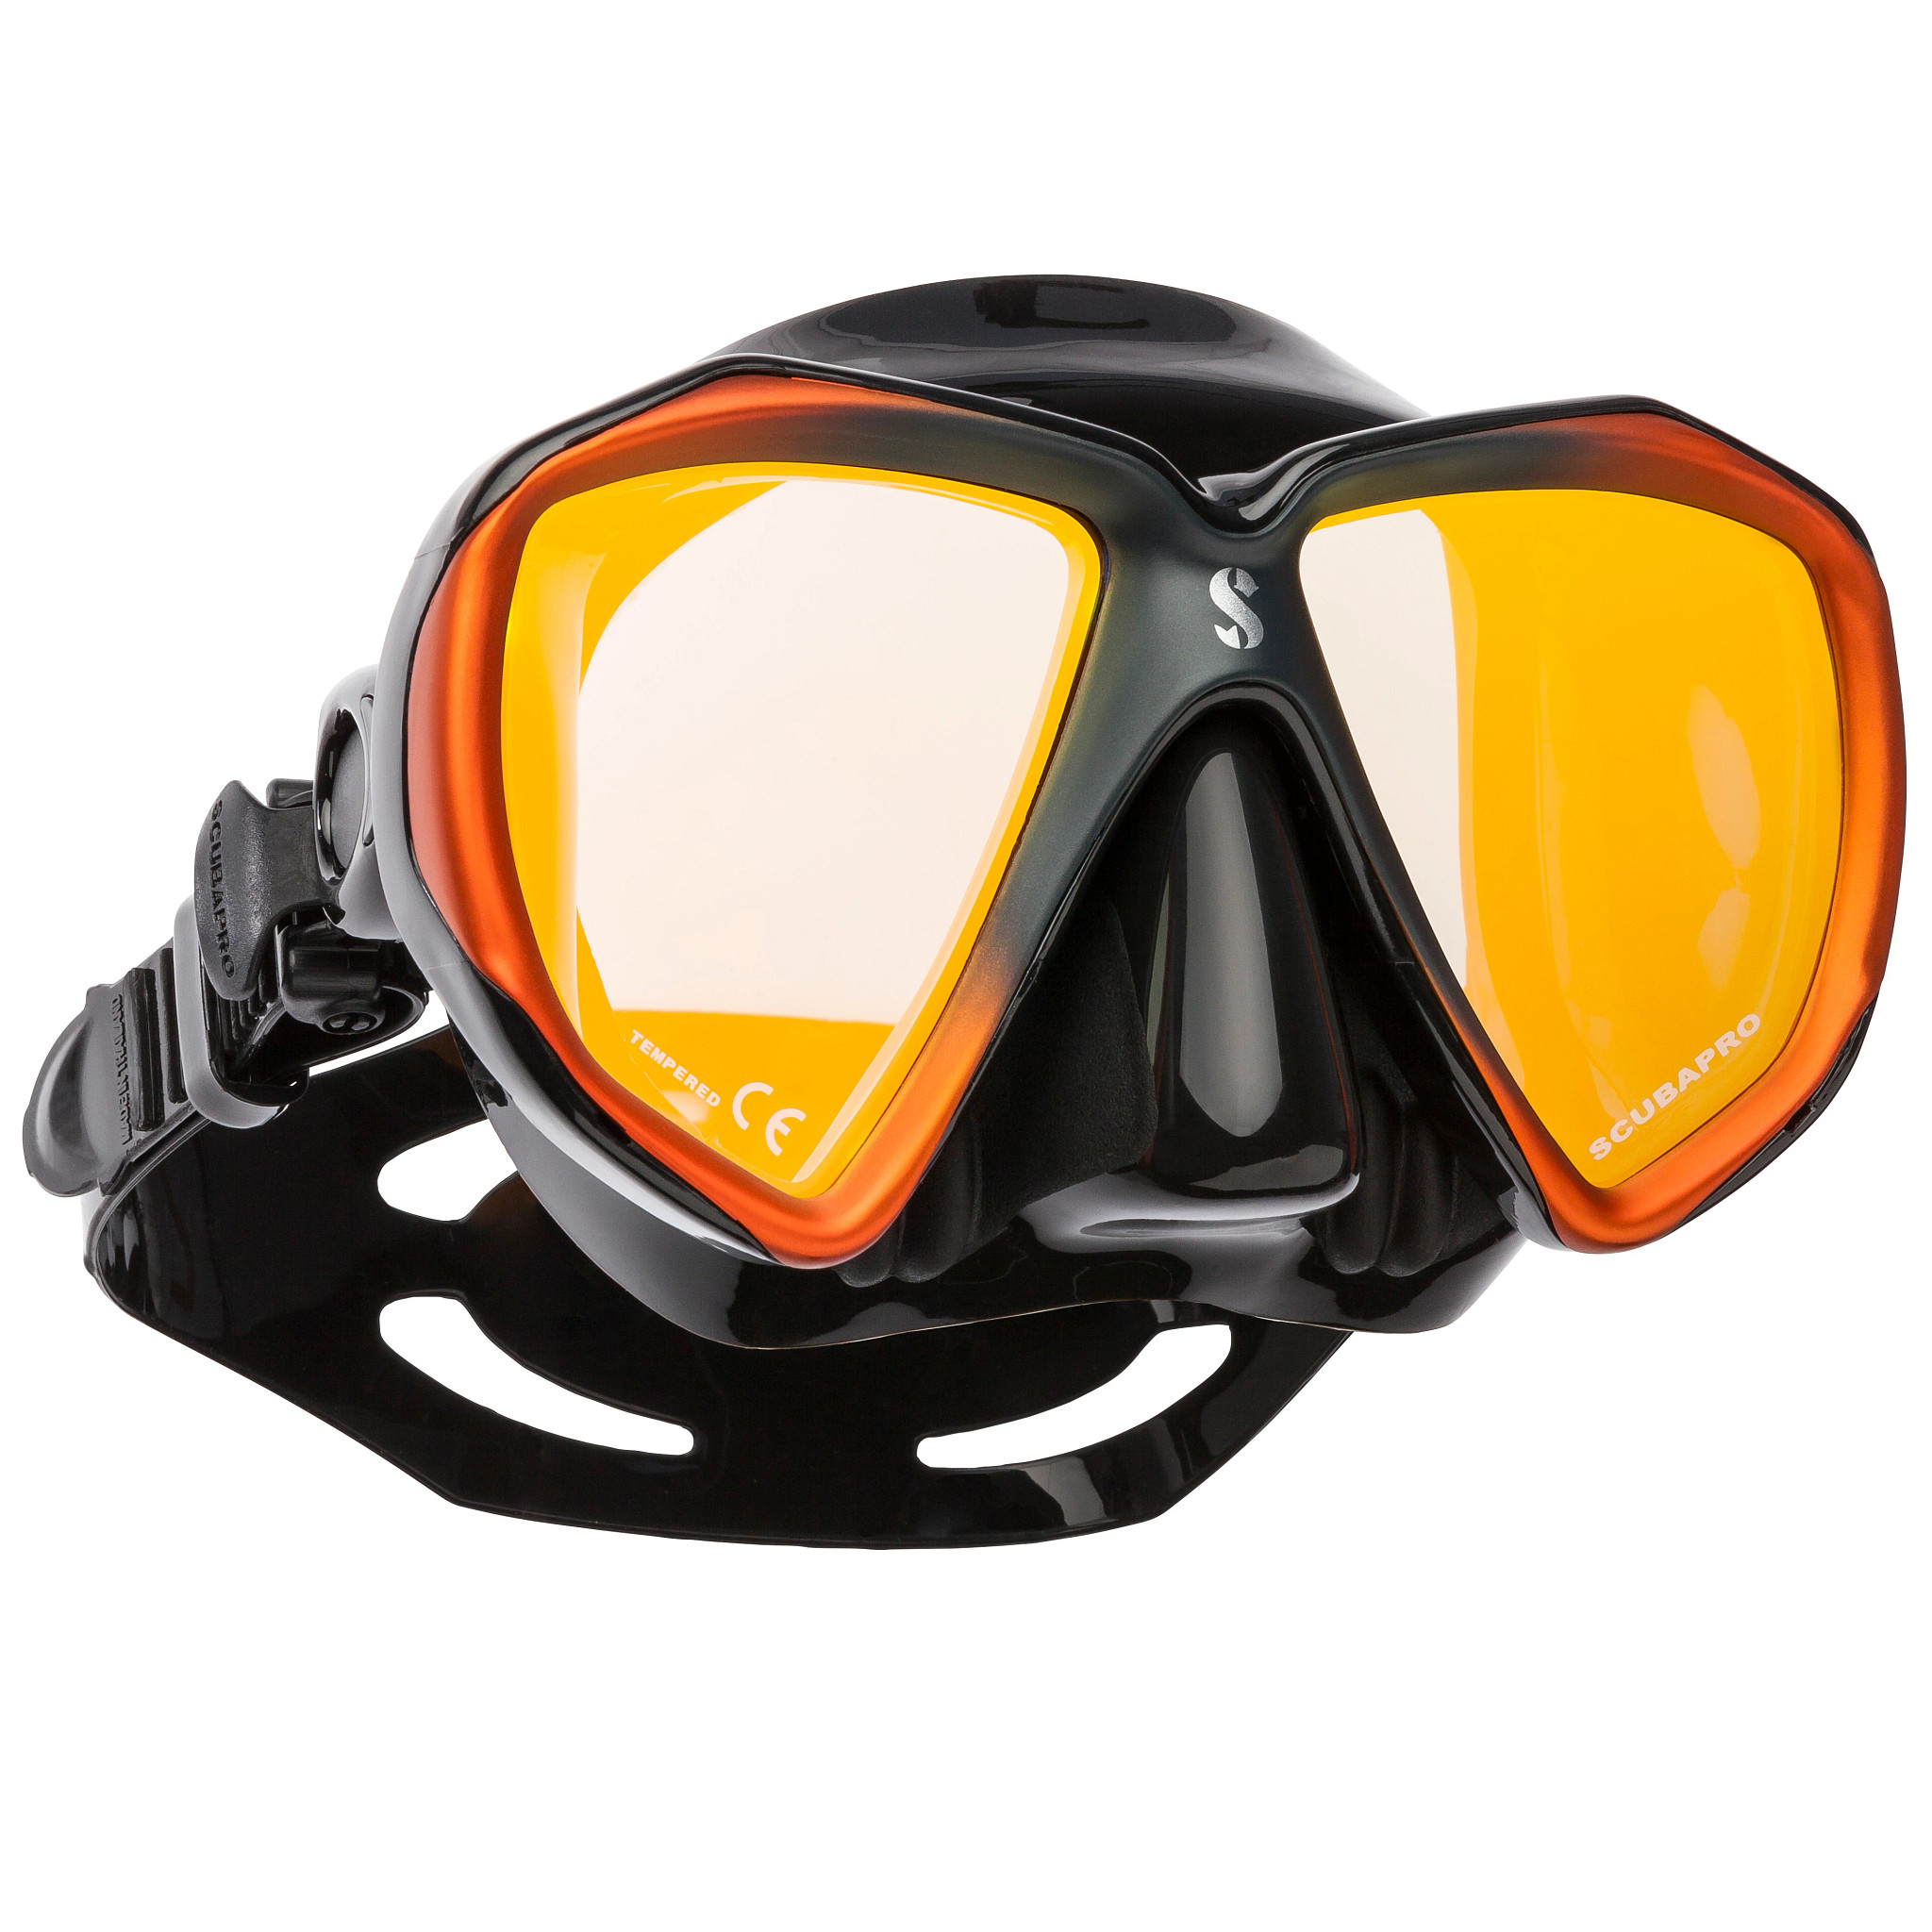 Spectra Dive Mask W Mirrored Lens Scubapro Us